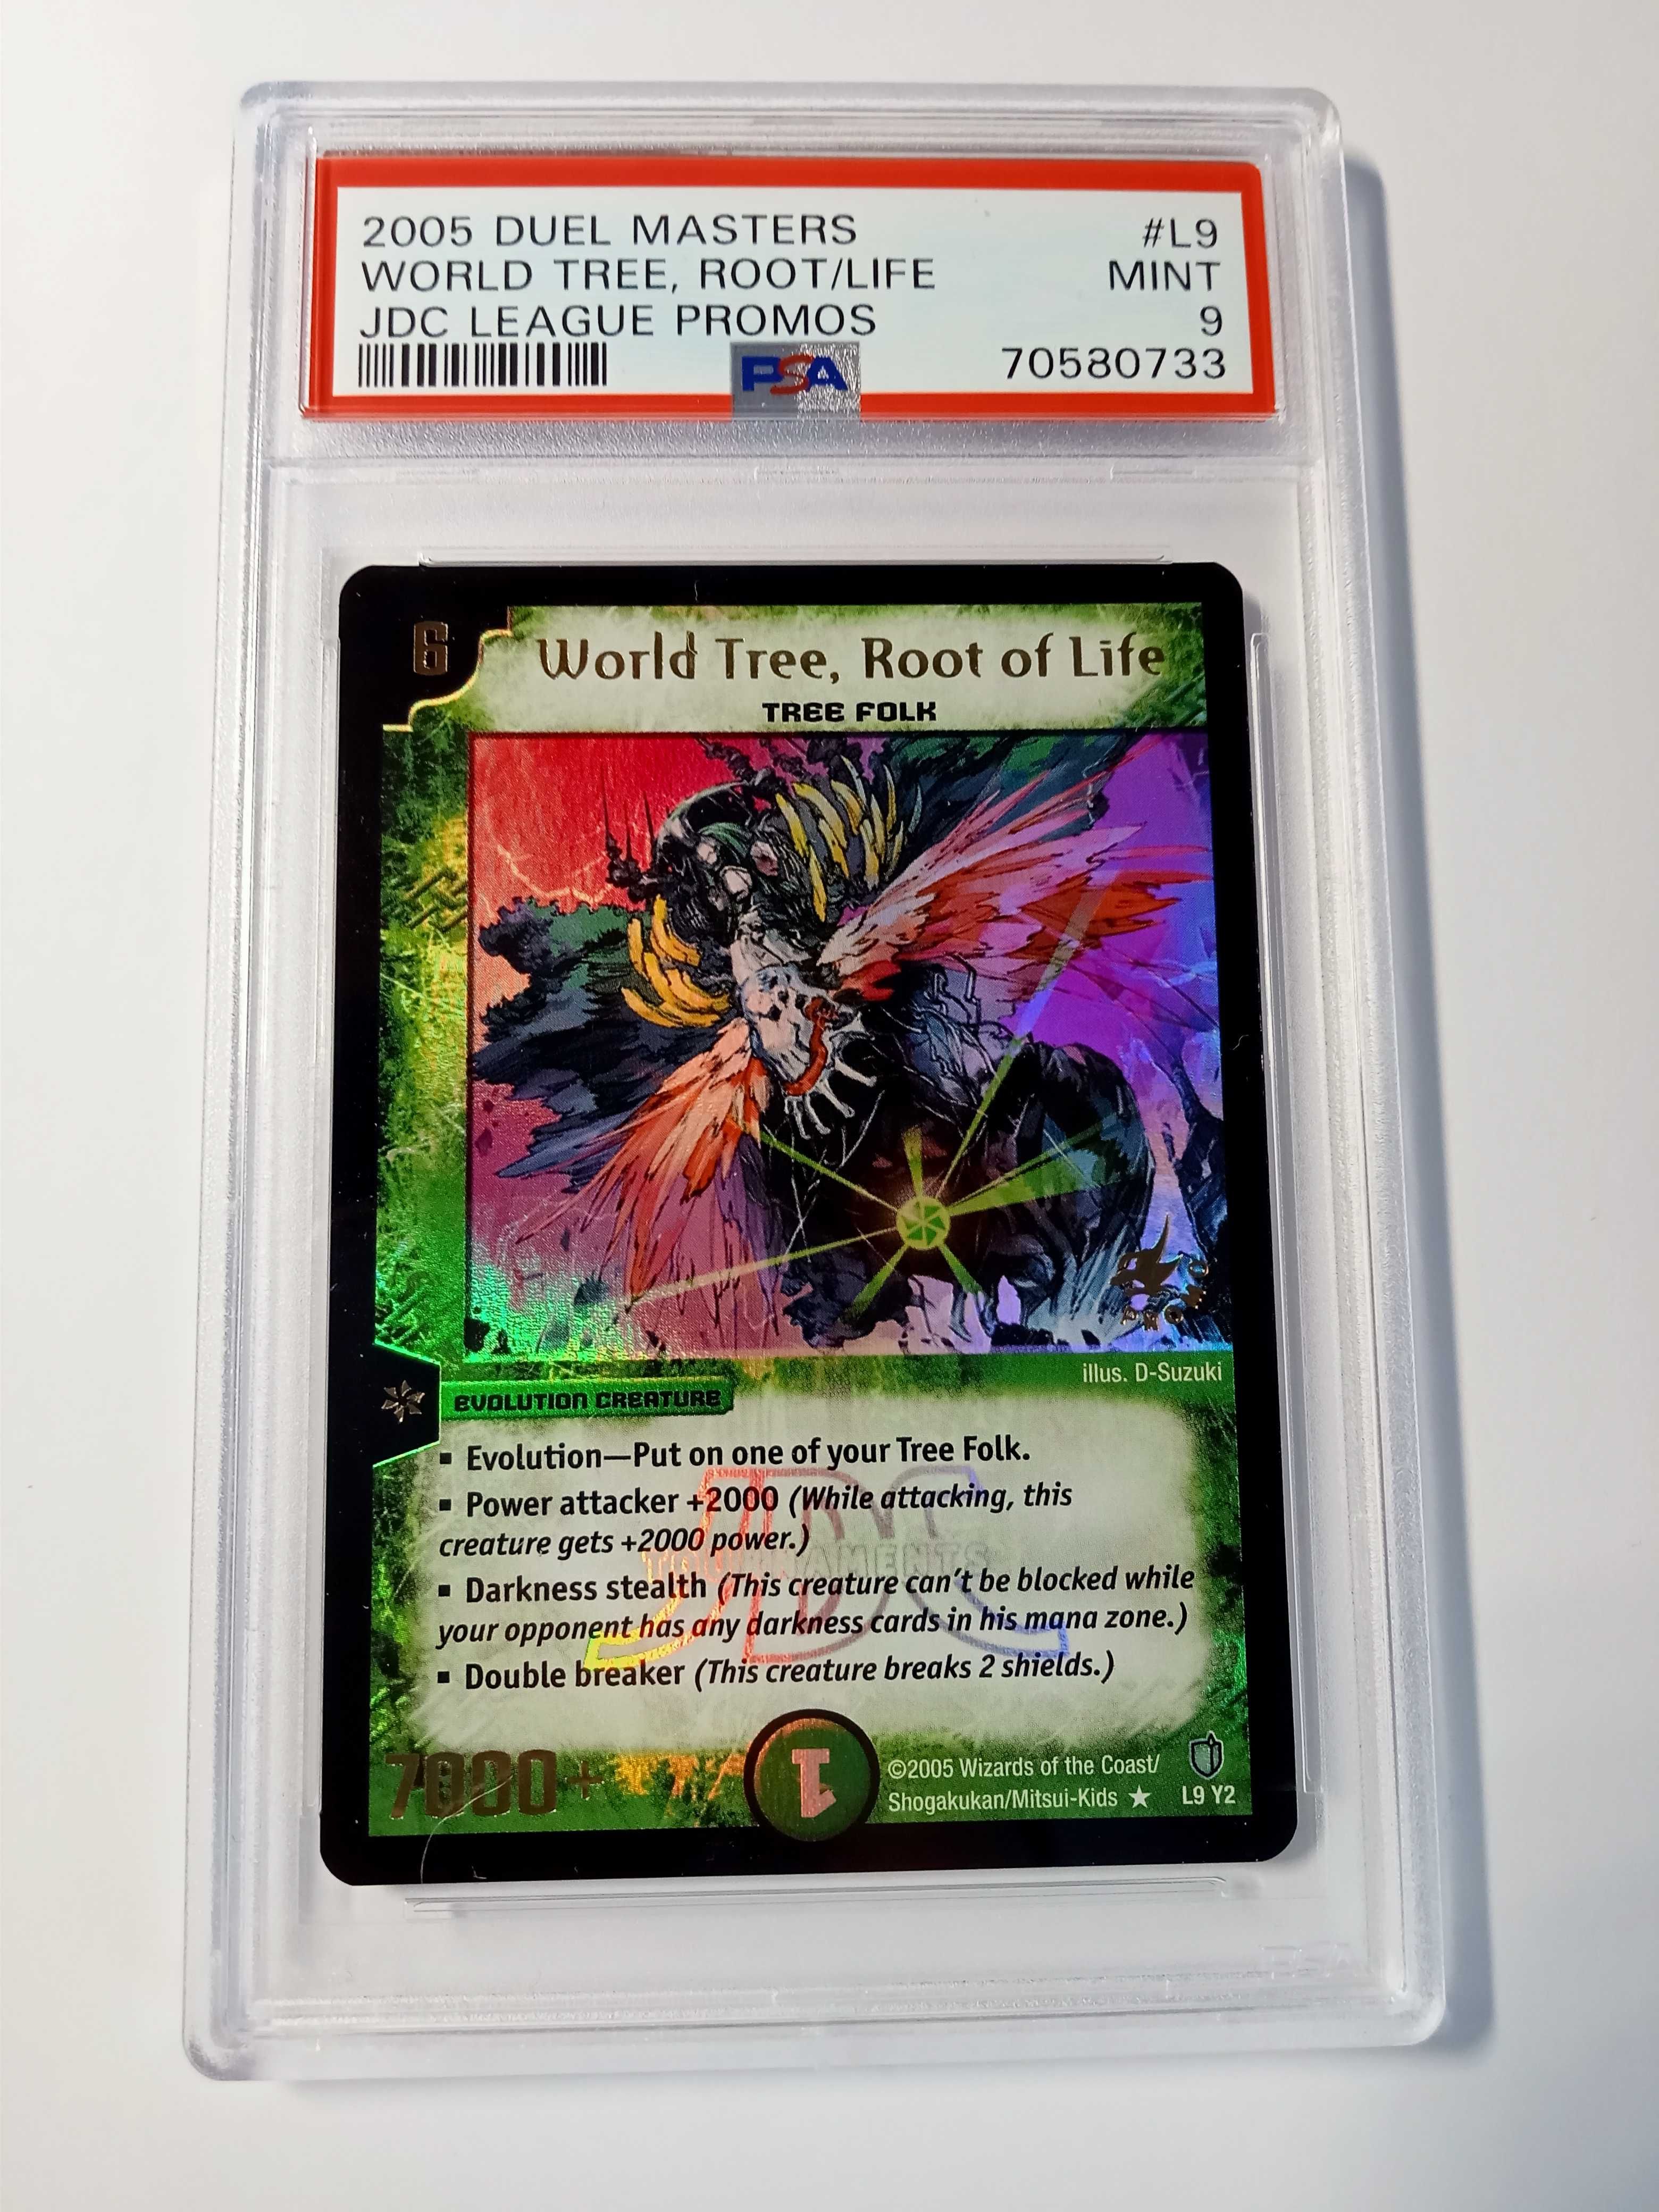 Duel Masters, World Tree, Root of Life PSA 9 graded